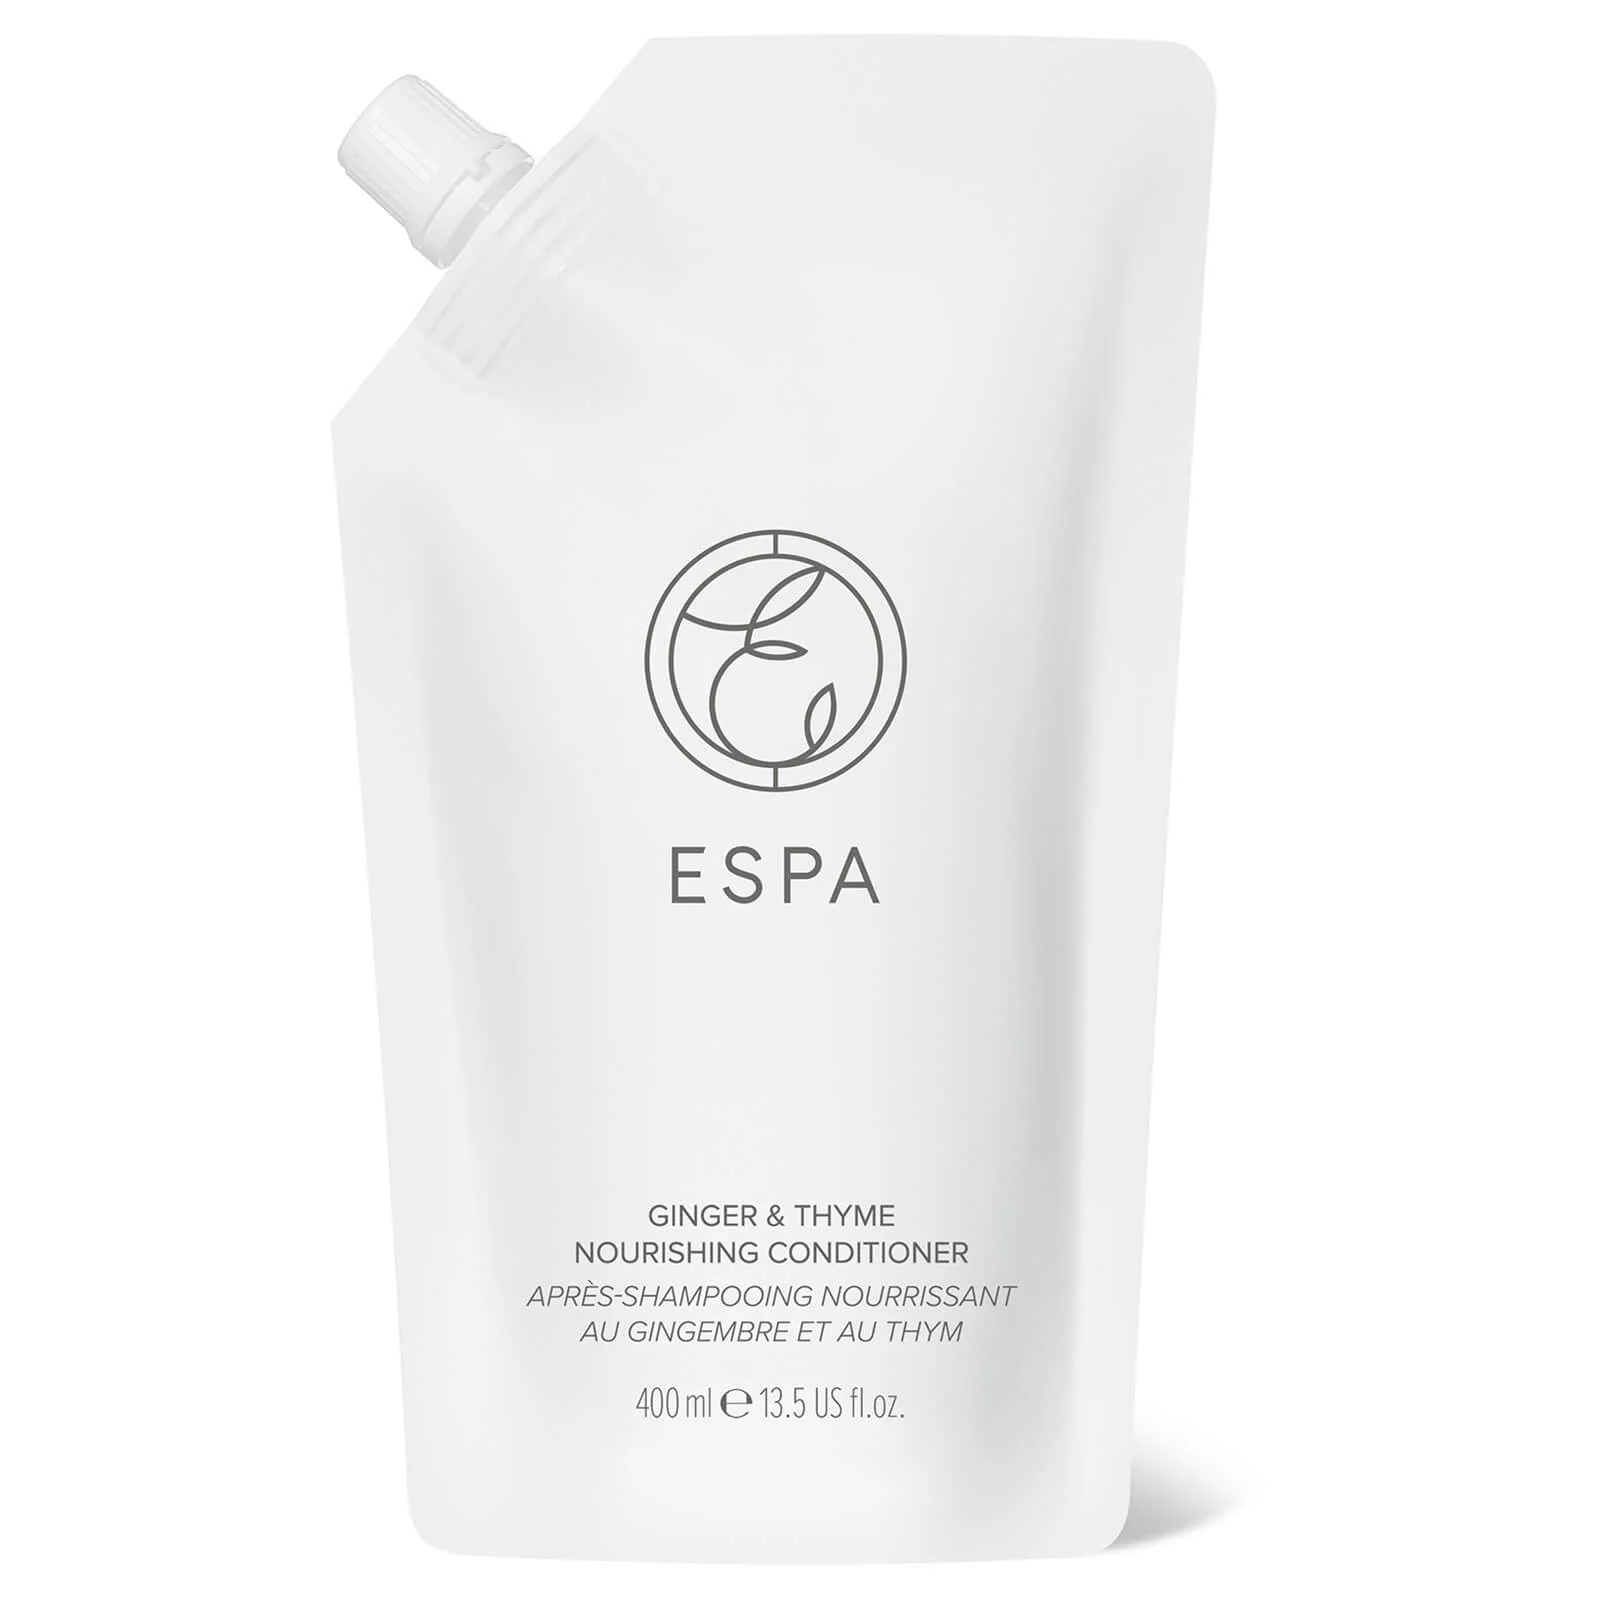 ESPA Essentials Nourishing Conditioner 400ml - Ginger and Thyme Image 1